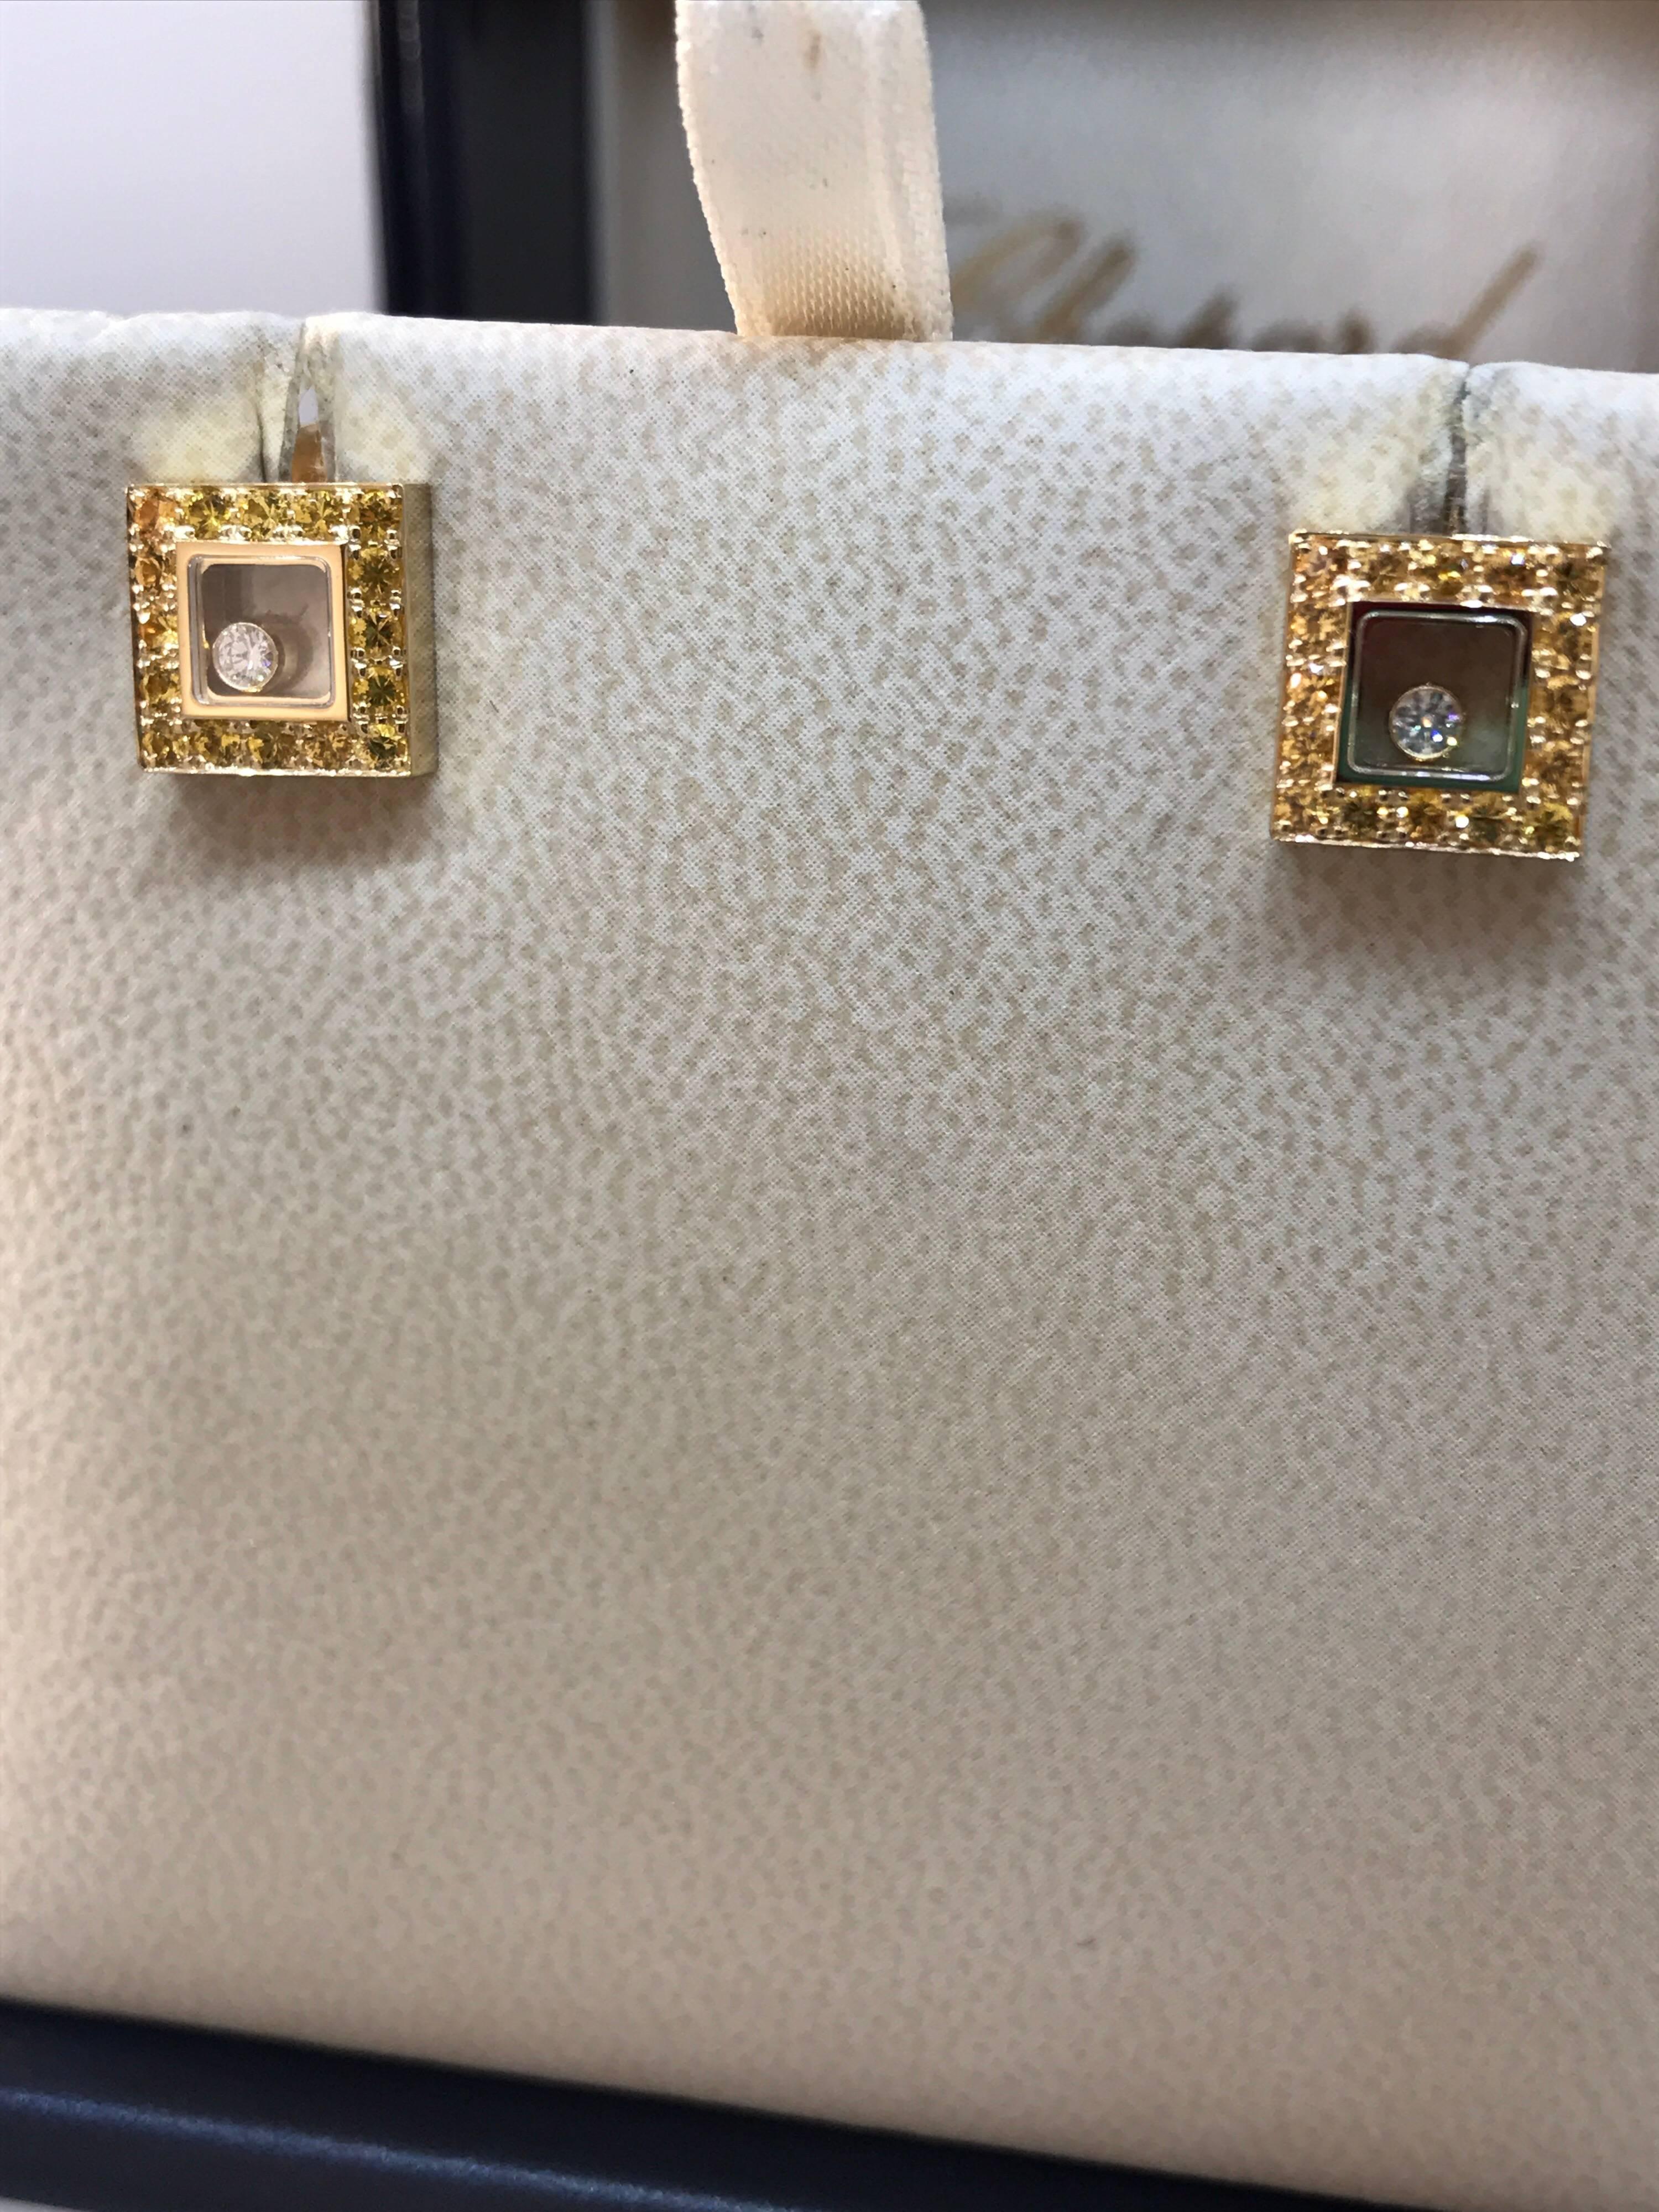 Chopard Happy Diamonds Square Earrings

Model Number: 83/2896-0004

100% Authentic

Brand New

Comes with original Chopard box, certificate of authenticity and warranty and jewels manual

18 Karat Yellow Gold (9.20gr)

16 Yellow Sapphires on each